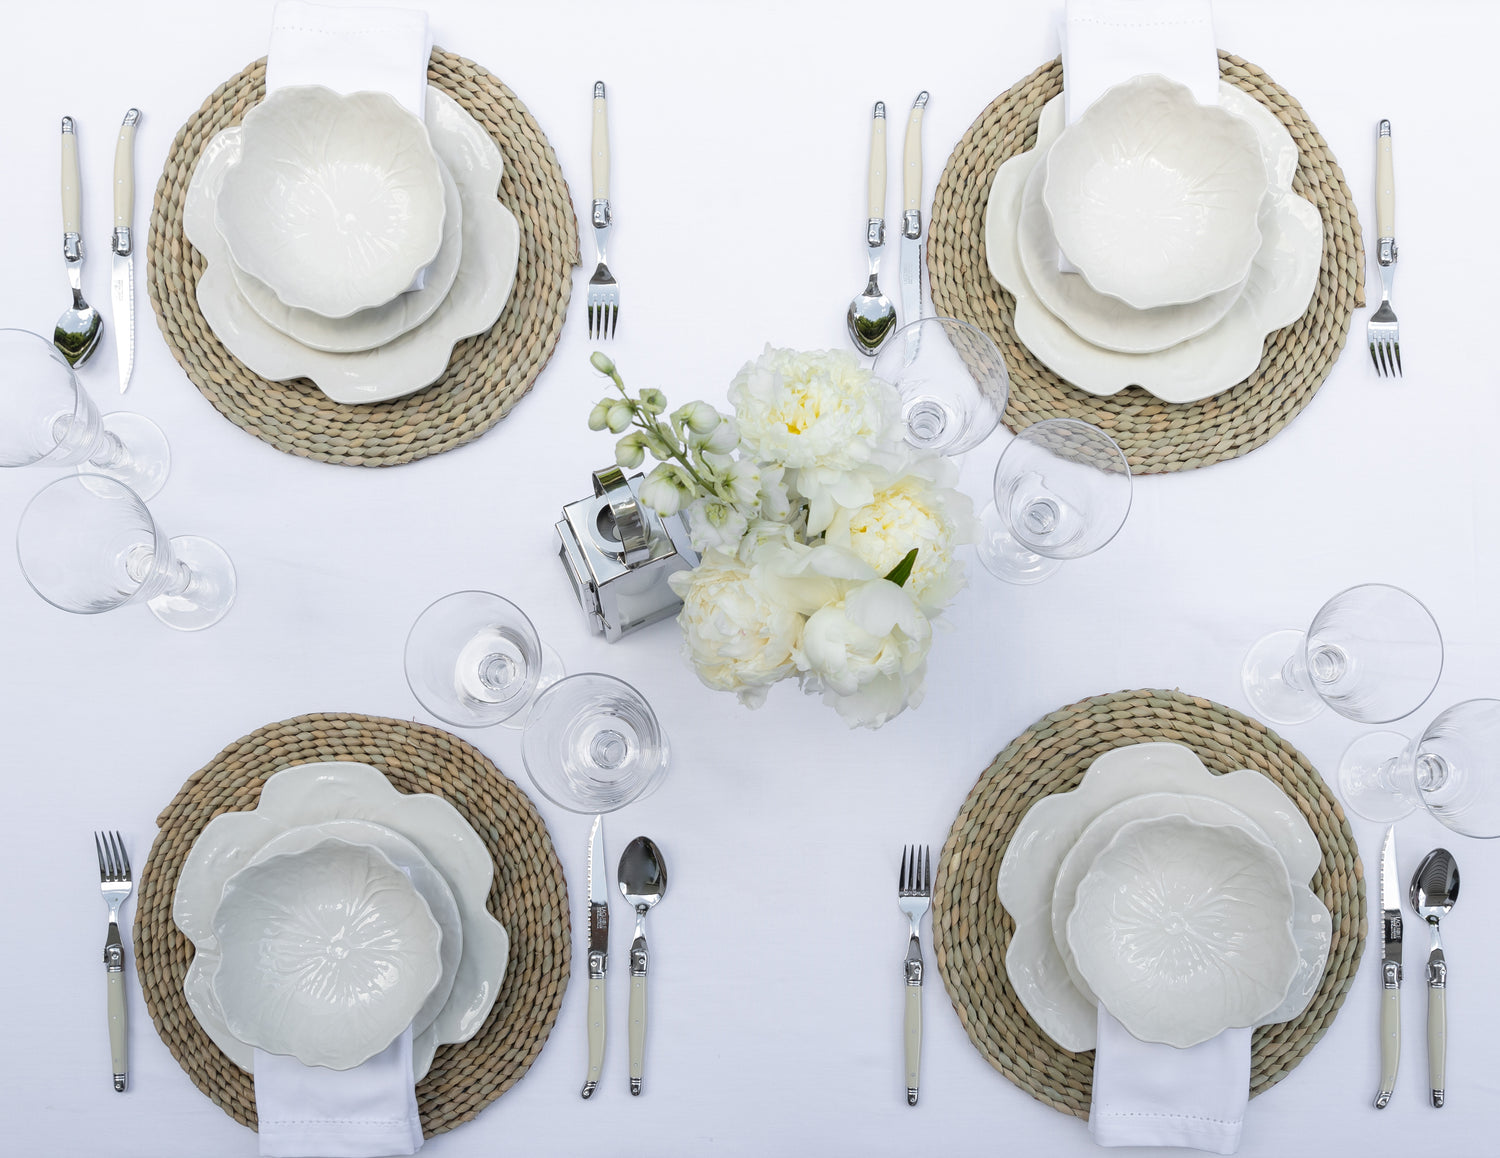 Birds Eye View Photo of the White Dulce Tablescape Setting With White Tablecloth